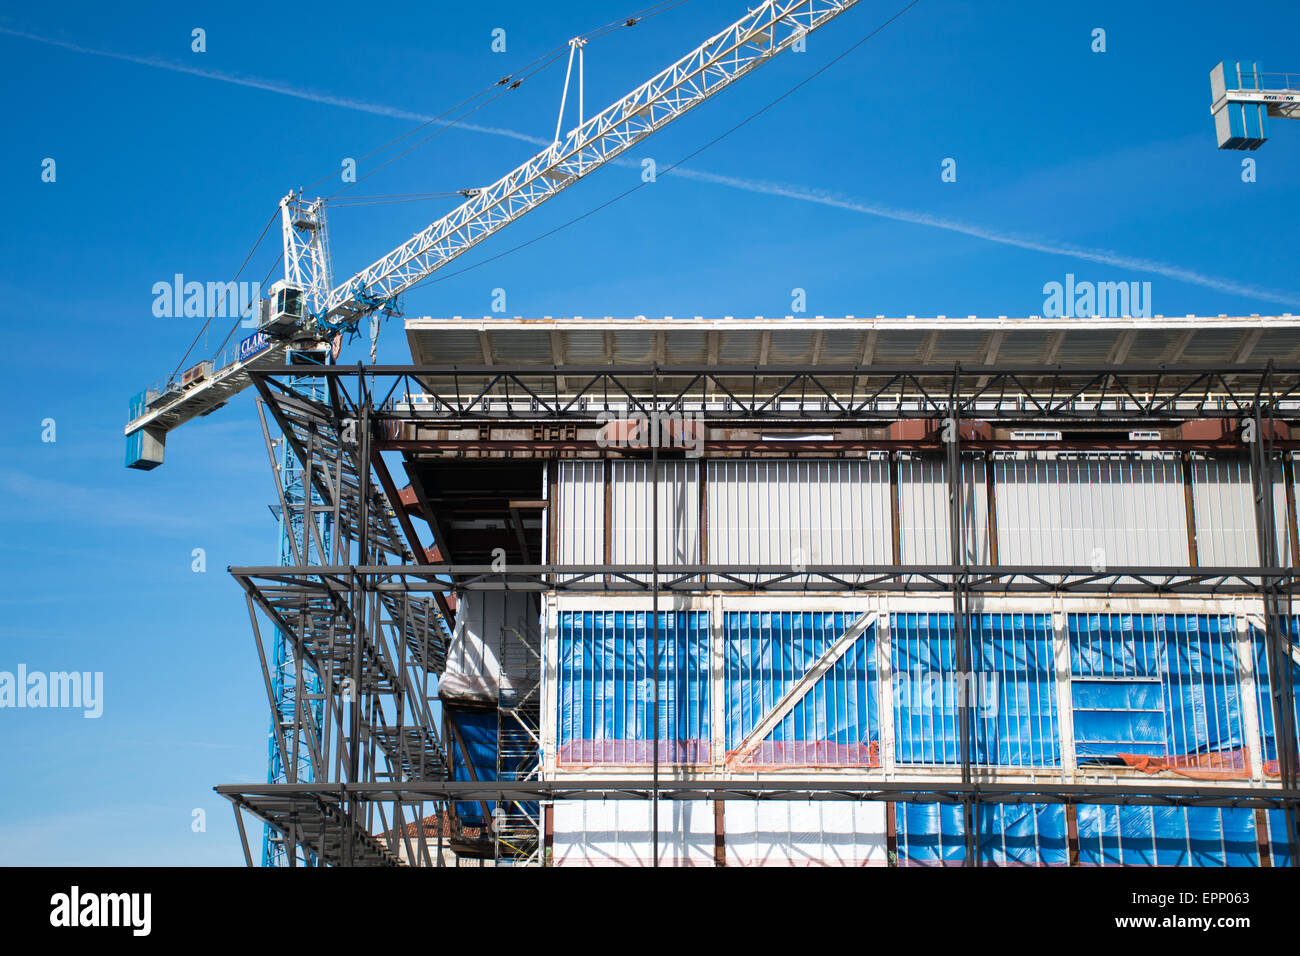 WASHINGTON DC, USA - The progress of construction of the Smithsonian African American Museum as of January 2015. The museum is located on the National Mall, near the Washington Monument, and is scheduled to open in 2016. Stock Photo